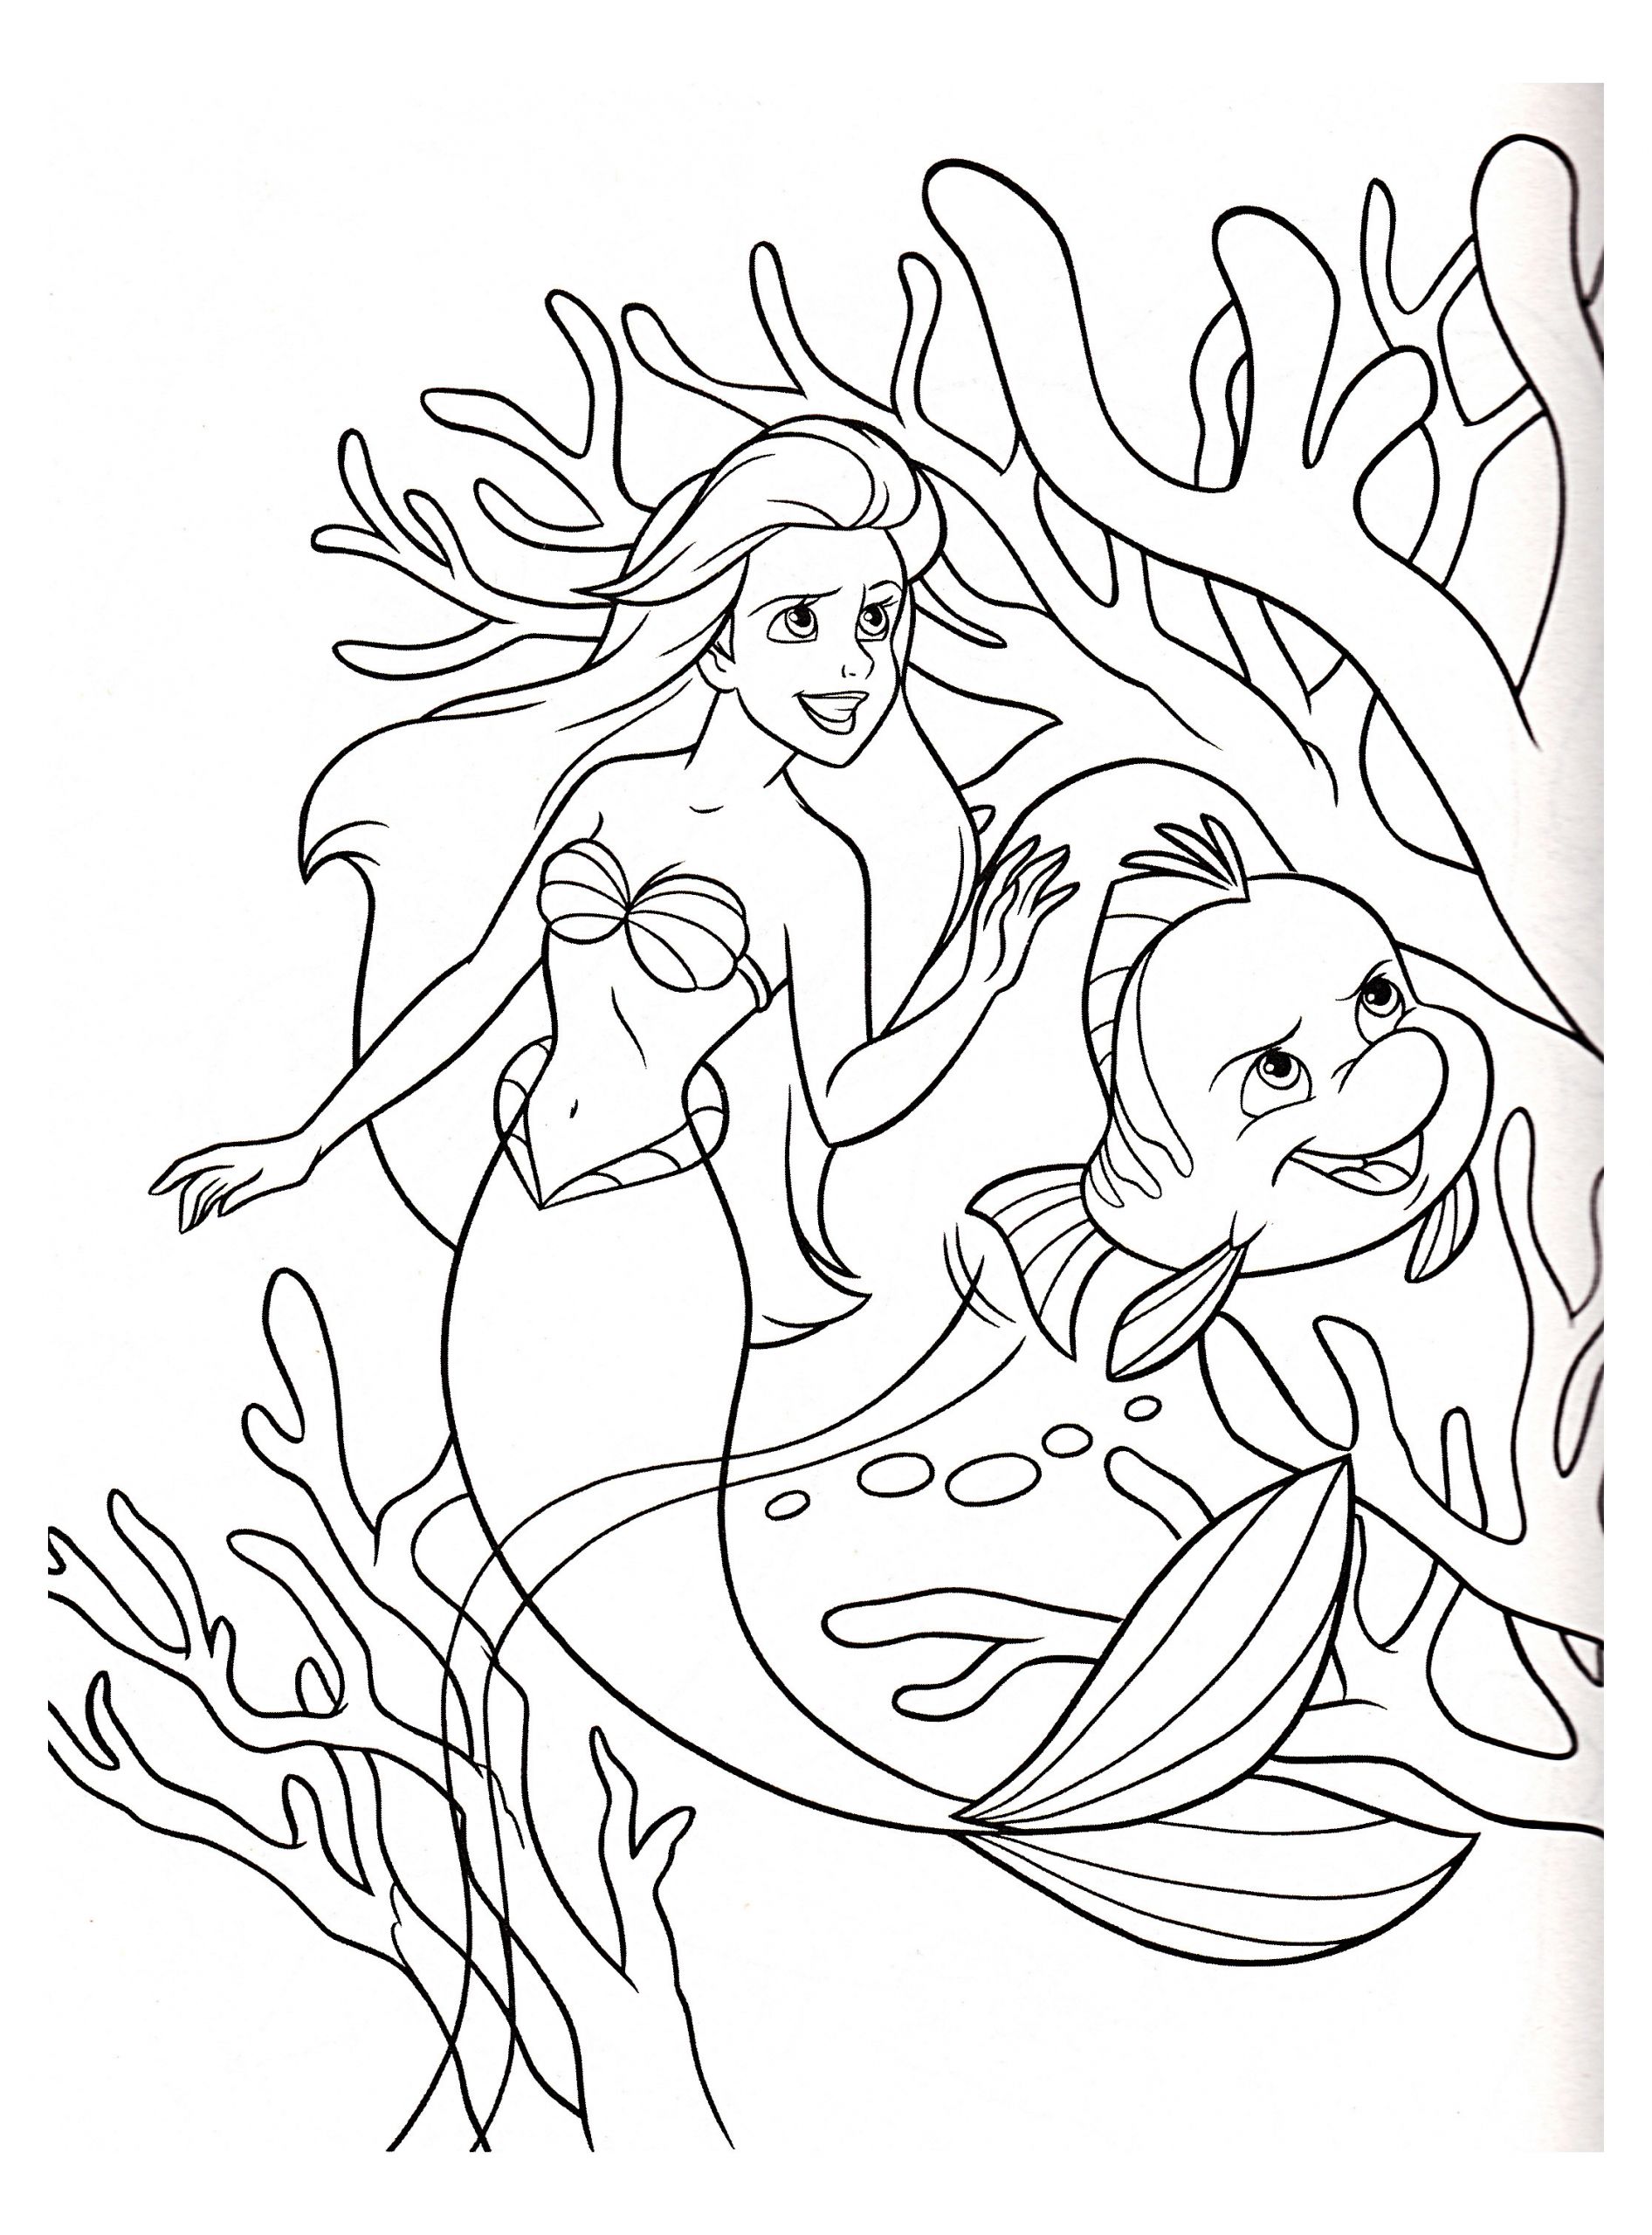 Kids Coloring Pages Mermaid
 The little mermaid to color for children The Little